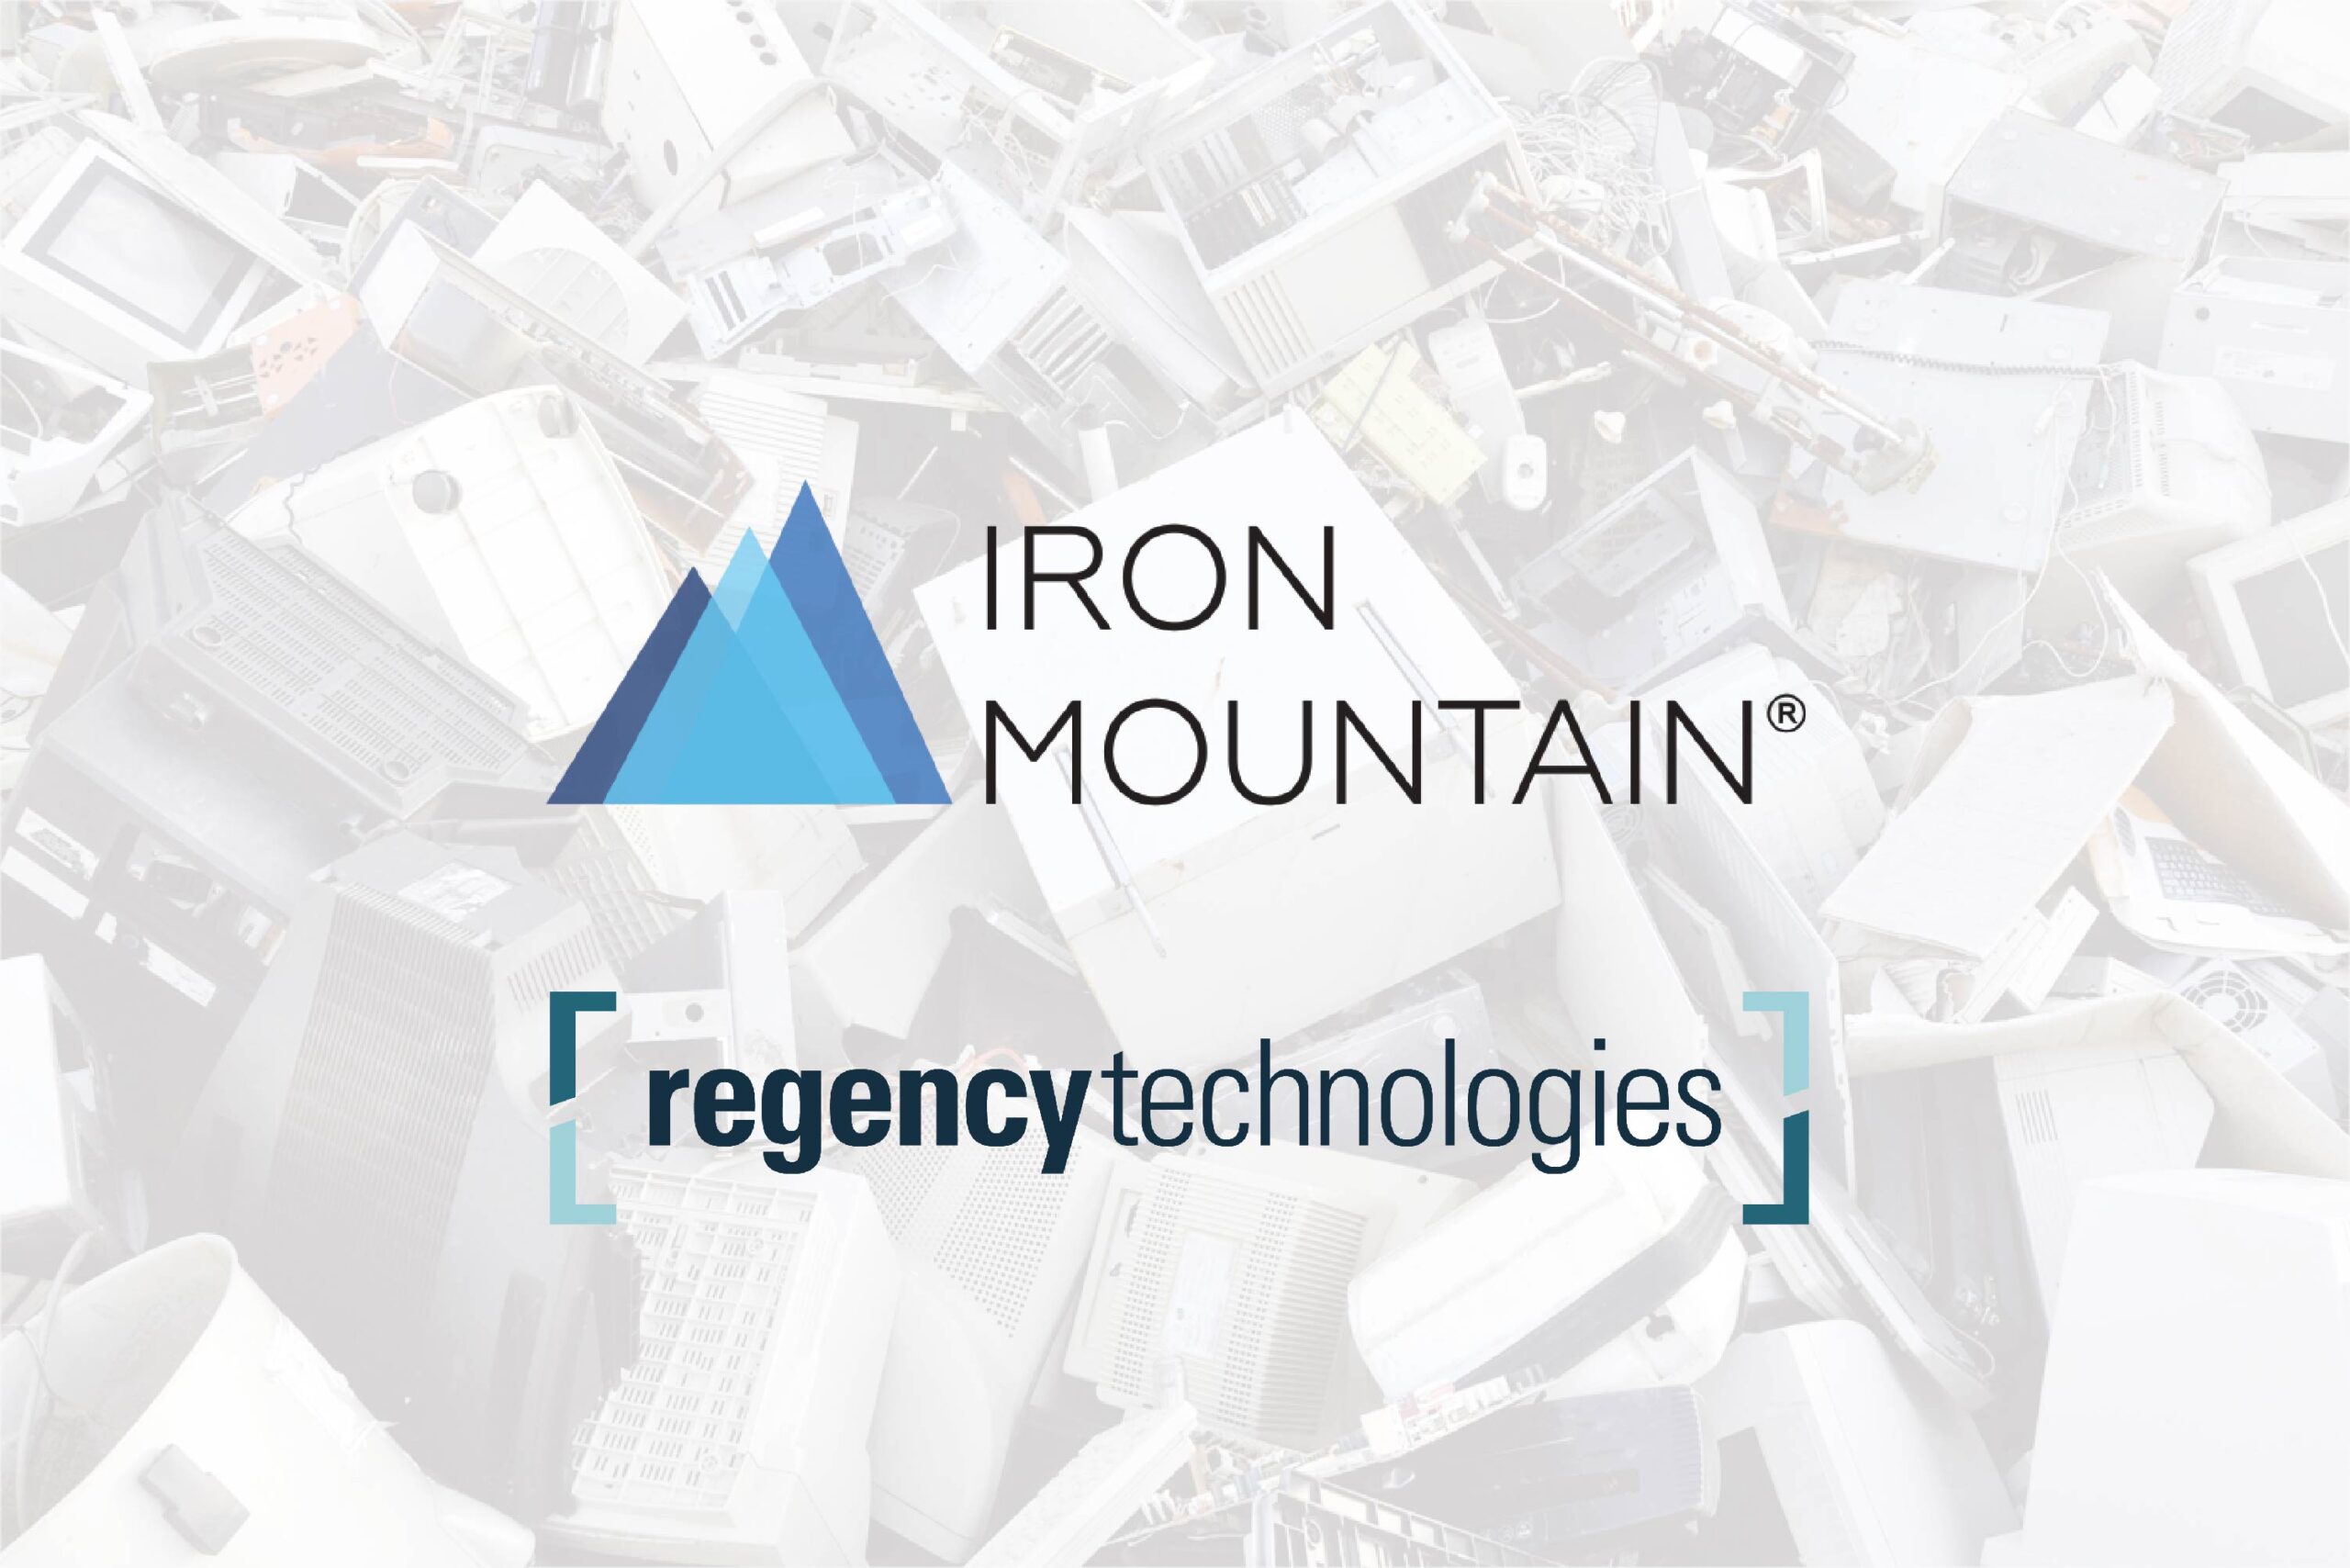 Iron Mountain to Acquire Regency Technologies